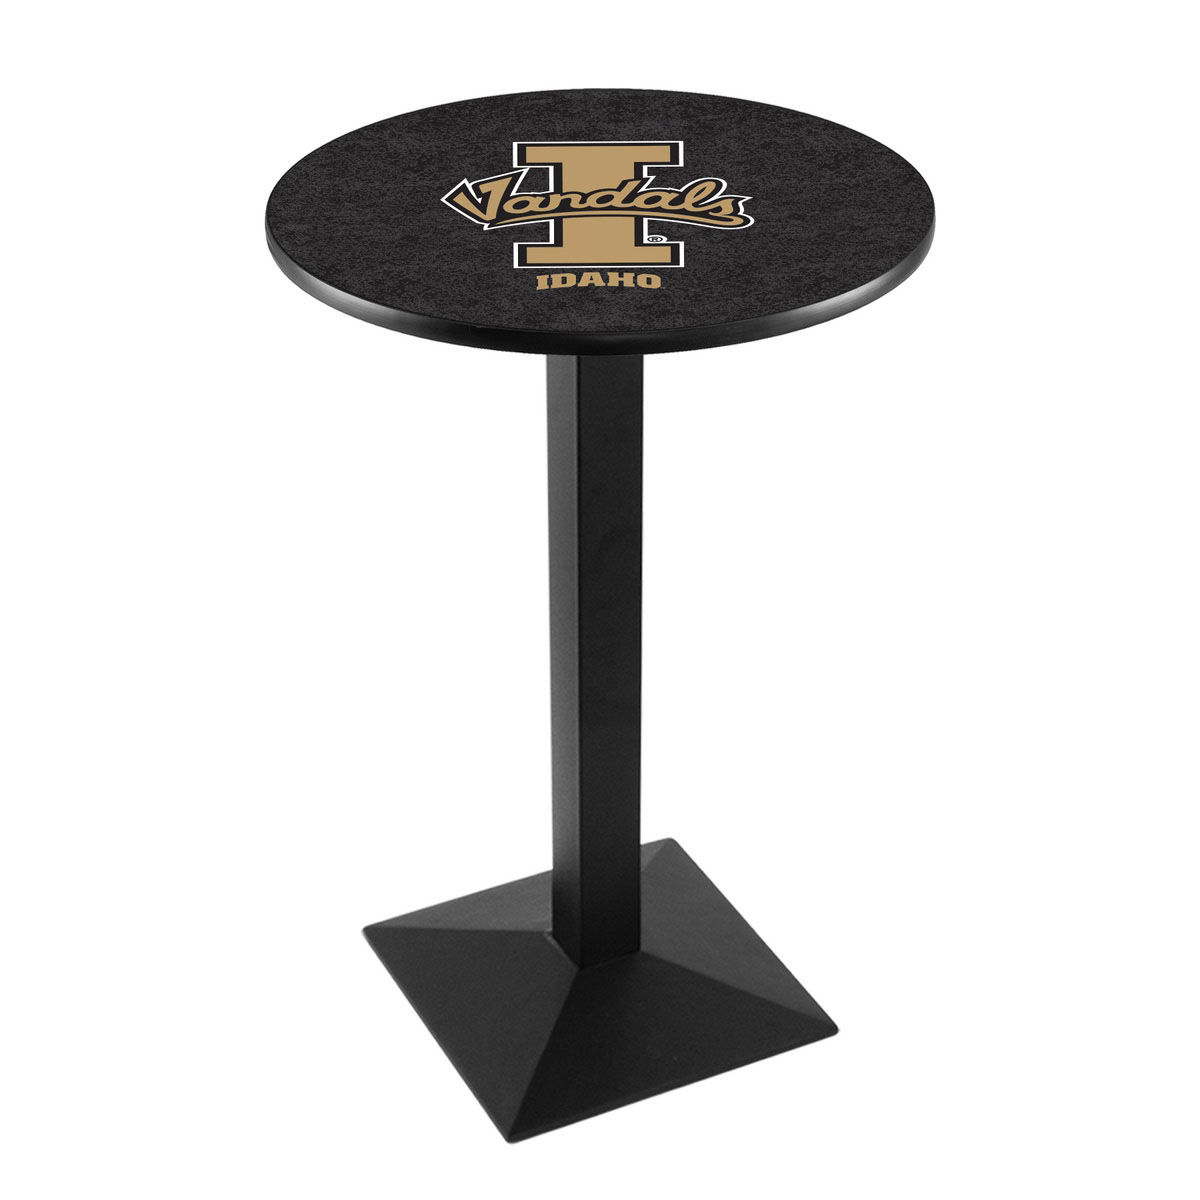 University Of Idaho Logo Pub Bar Table With Square Stand